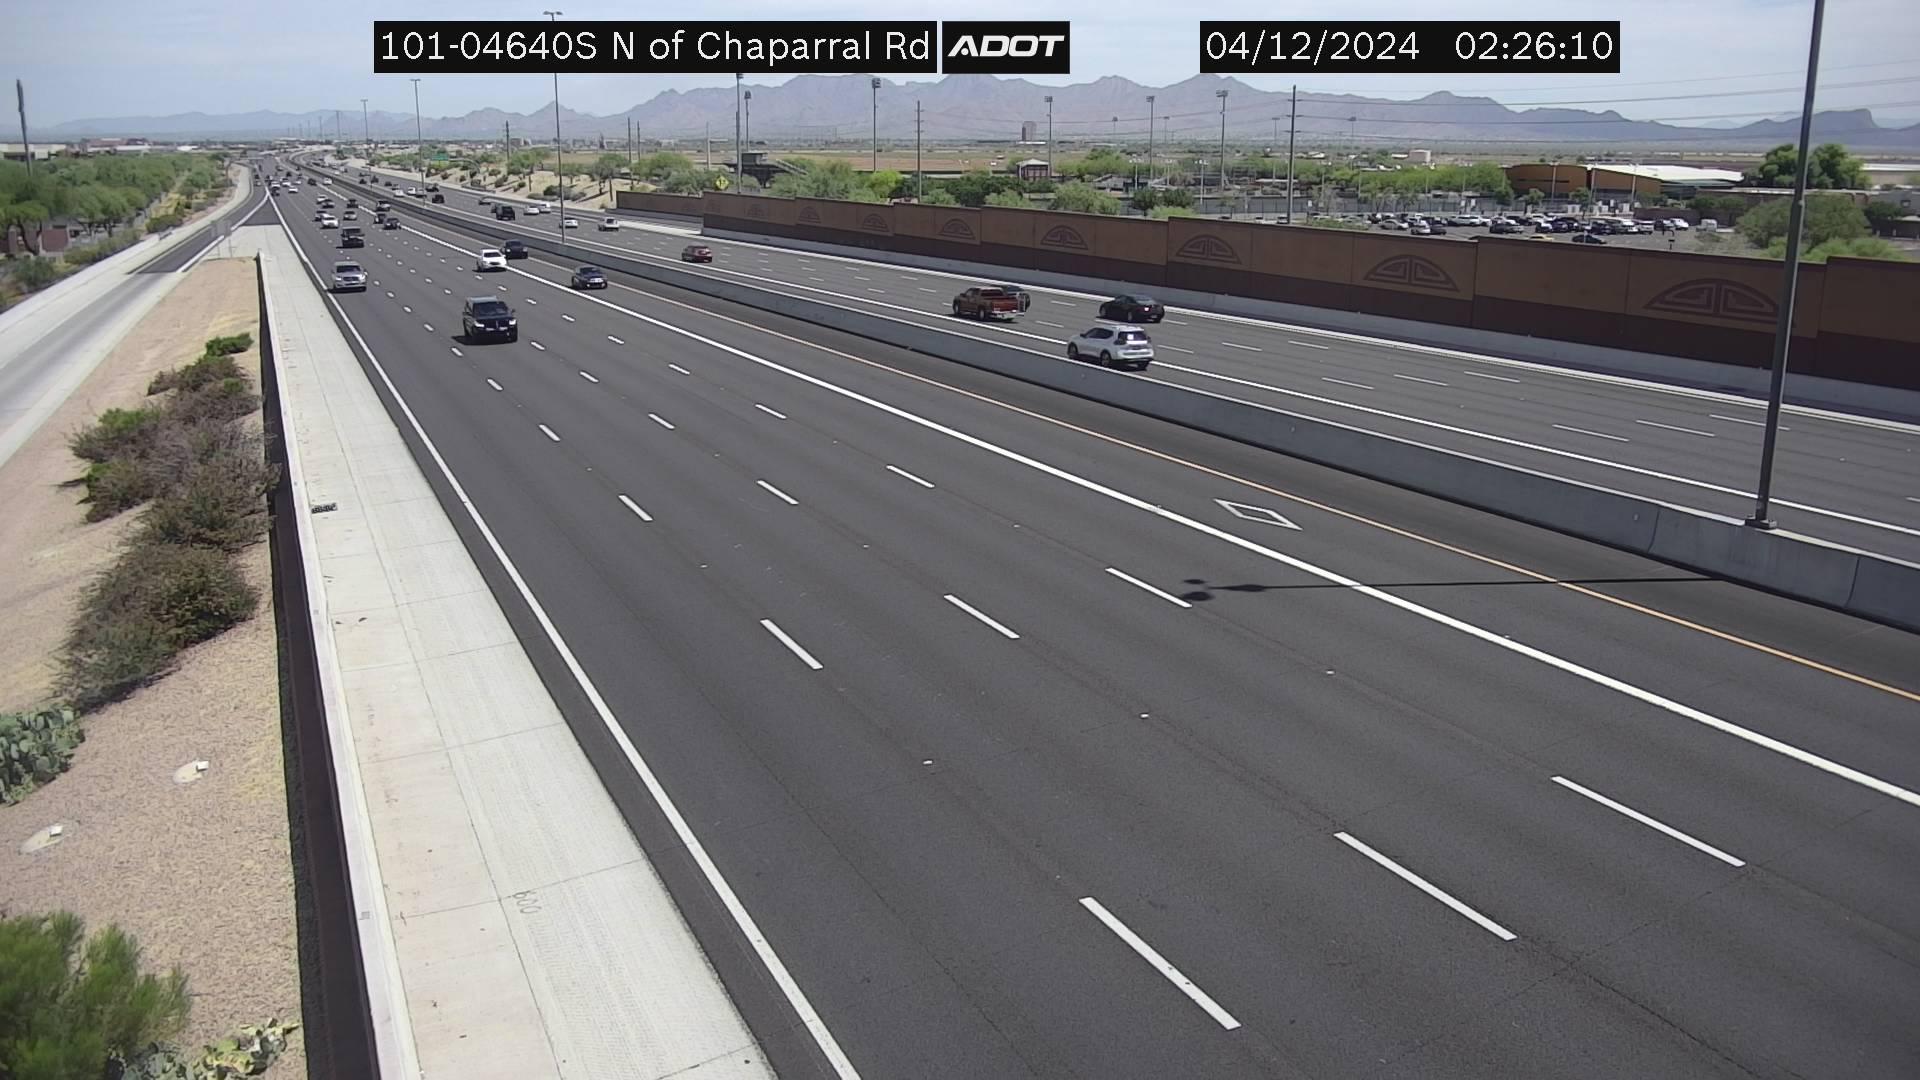 Traffic Cam Scottsdale › South: I-101 SB 46.40 @N of Chaparral Rd Player